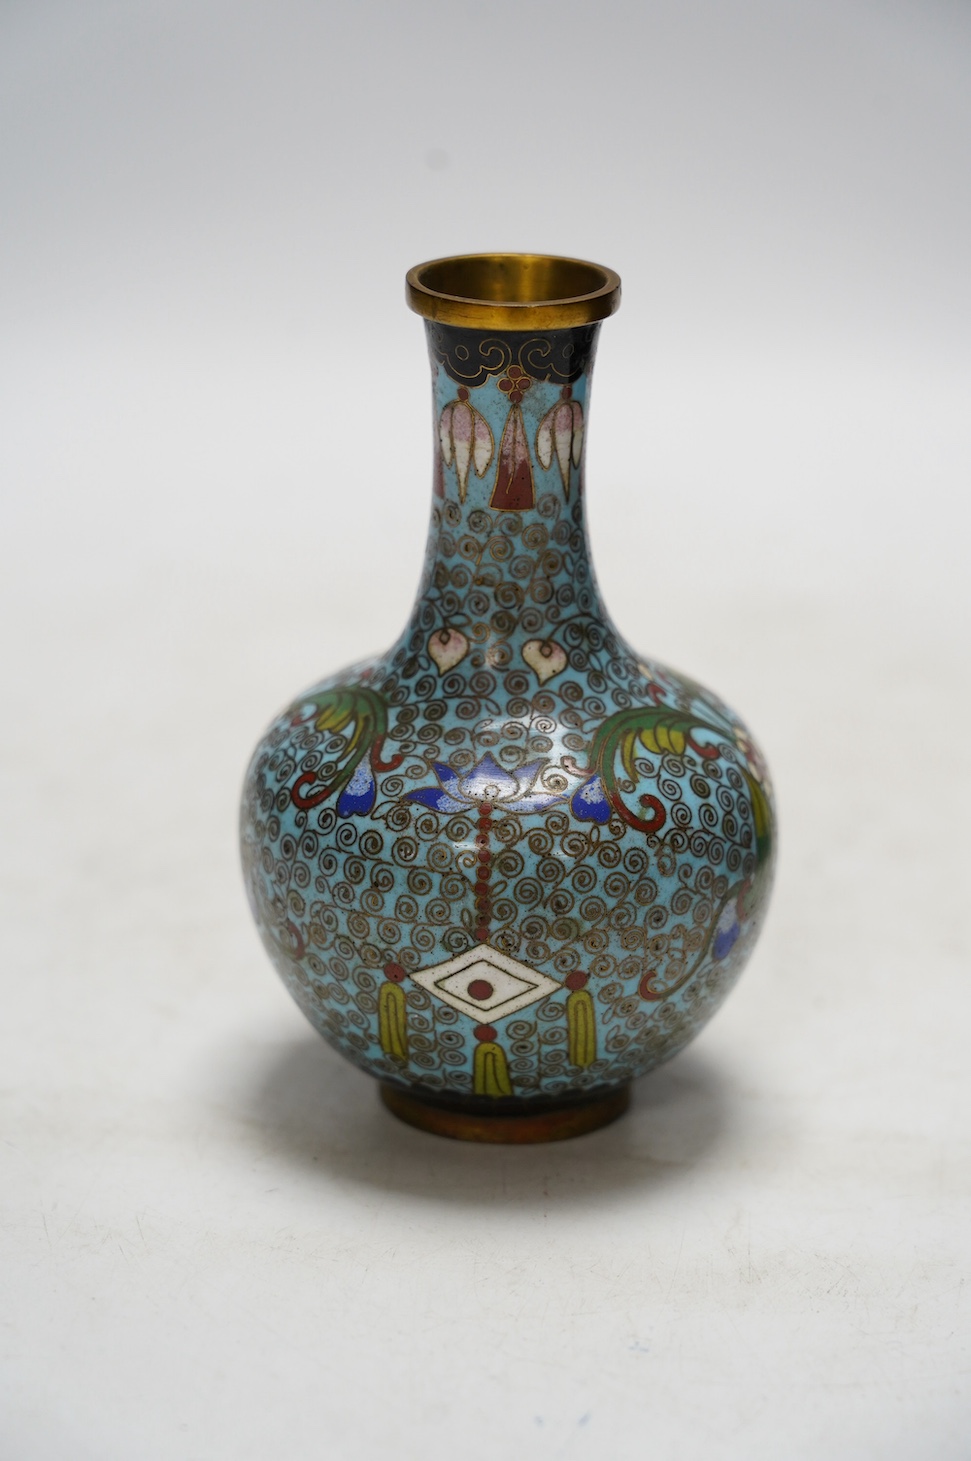 A Chinese cloisonné enamel vase, 13cm, and a set of five graduated lacquer boxes, the lids with inlaid silver decorations, largest 13.5 x 10 x 6.5cm. Condition - good